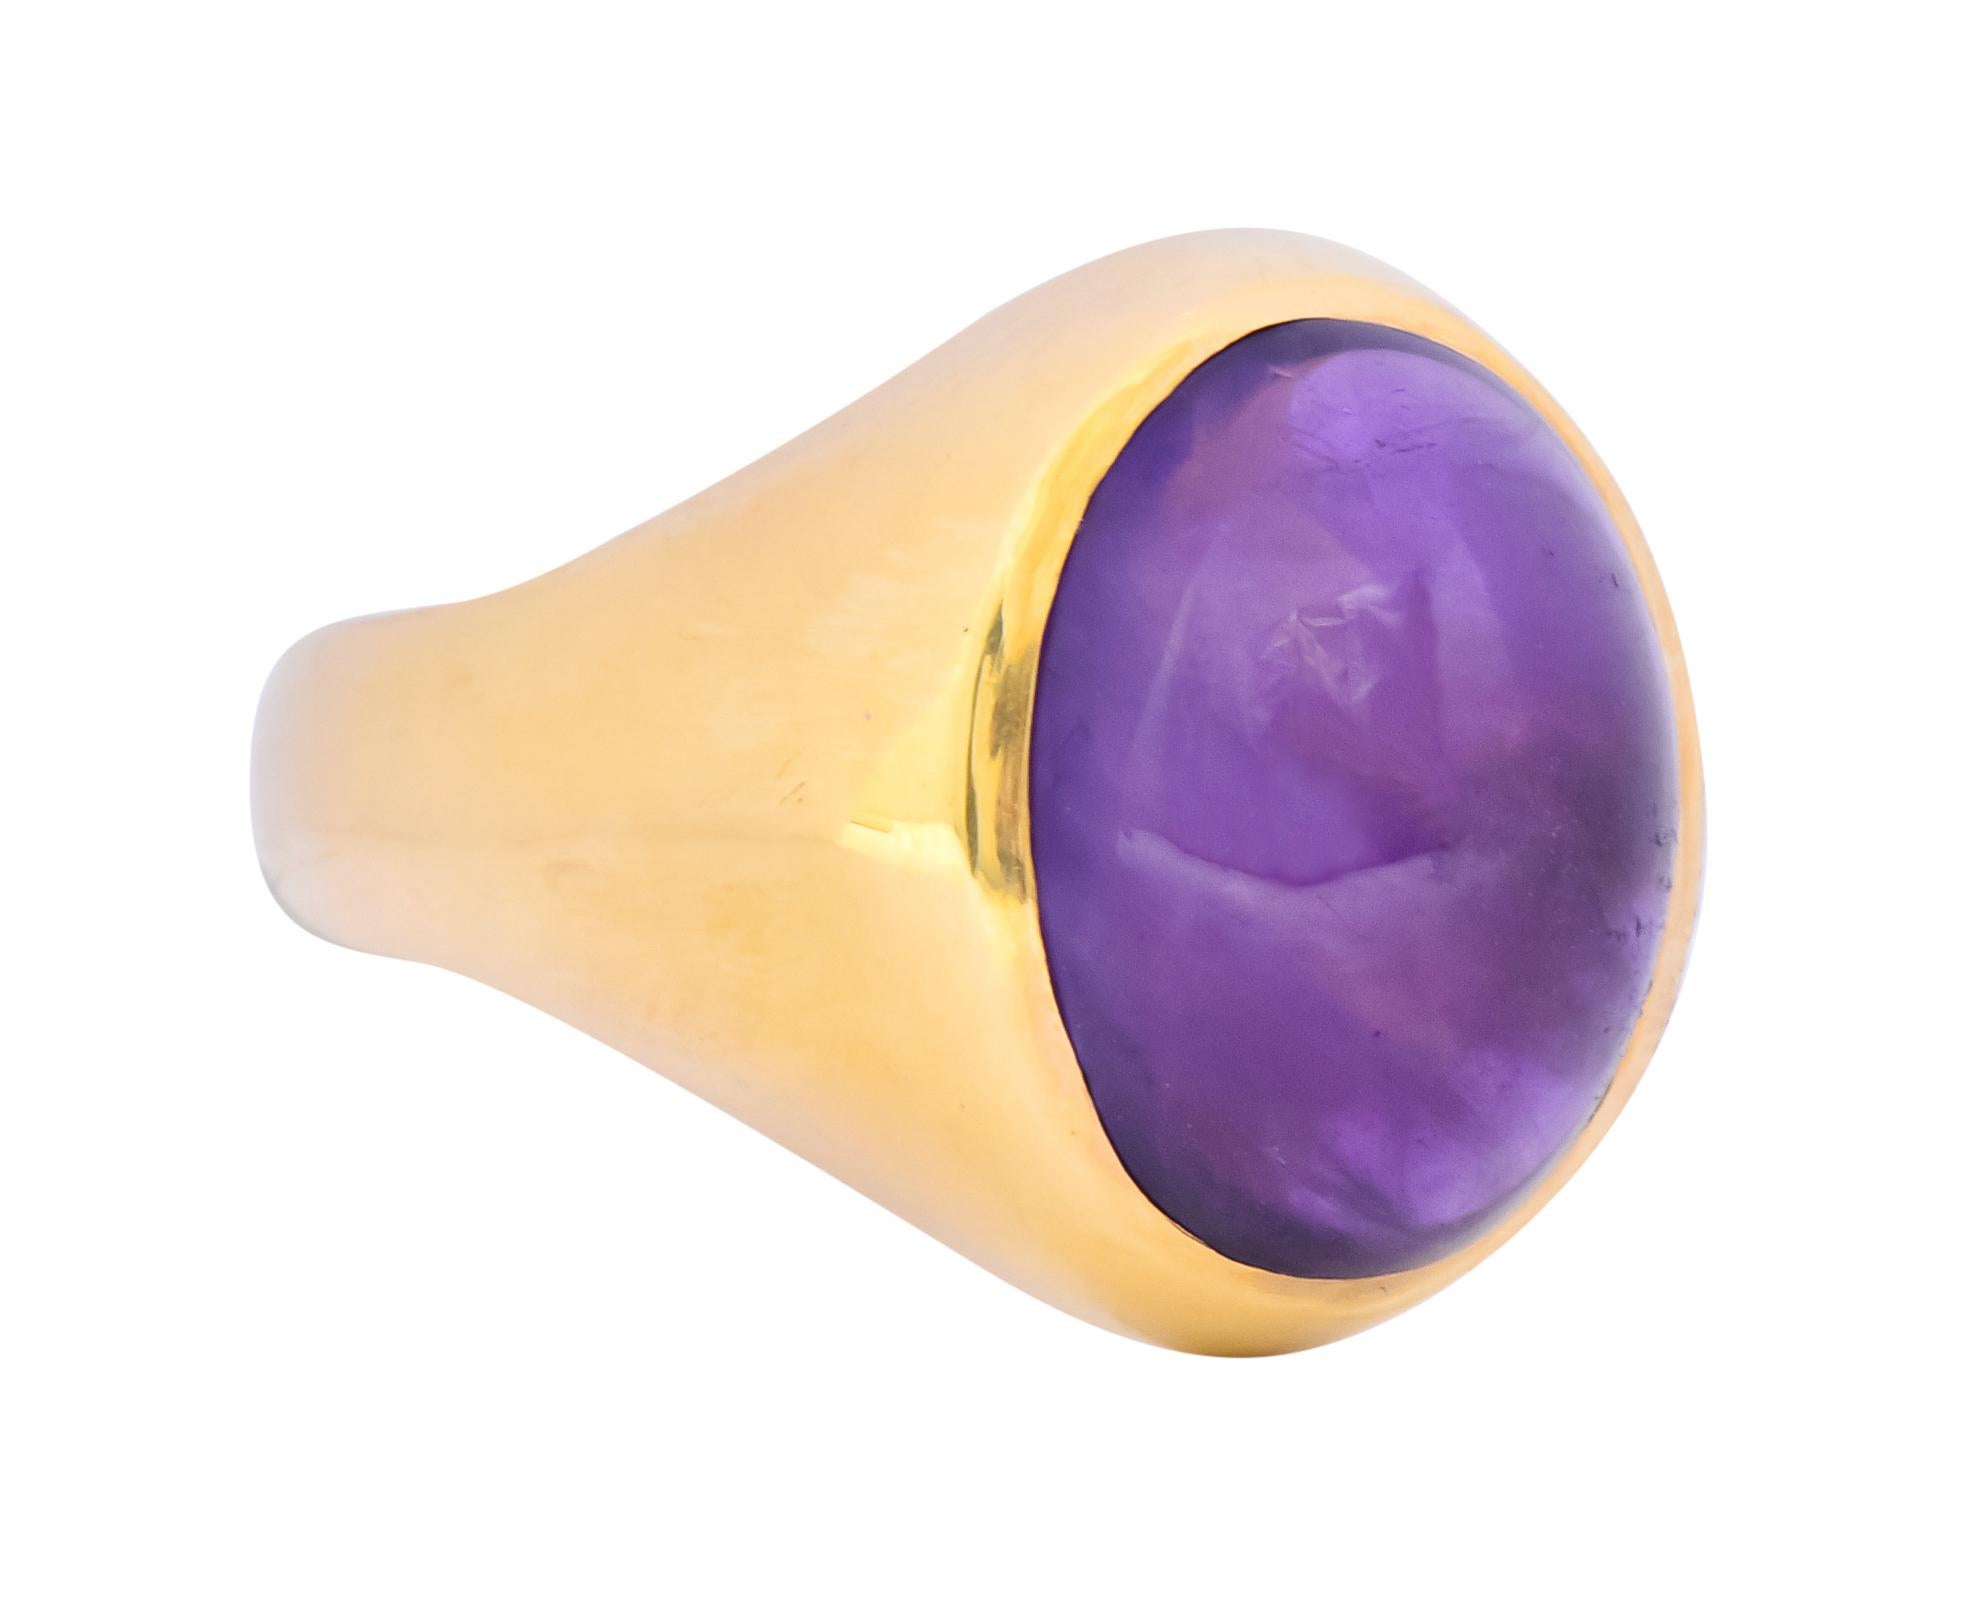 Centering an oval amethyst cabochon measuring approximately 3/4 x 9/16 inch, translucent and a rich medium-dark purple

Bezel set in a polished gold surround with tapered shoulders

Tested as 14 karat gold

Ring Size: 9 1/2 & sizable

Top measures: